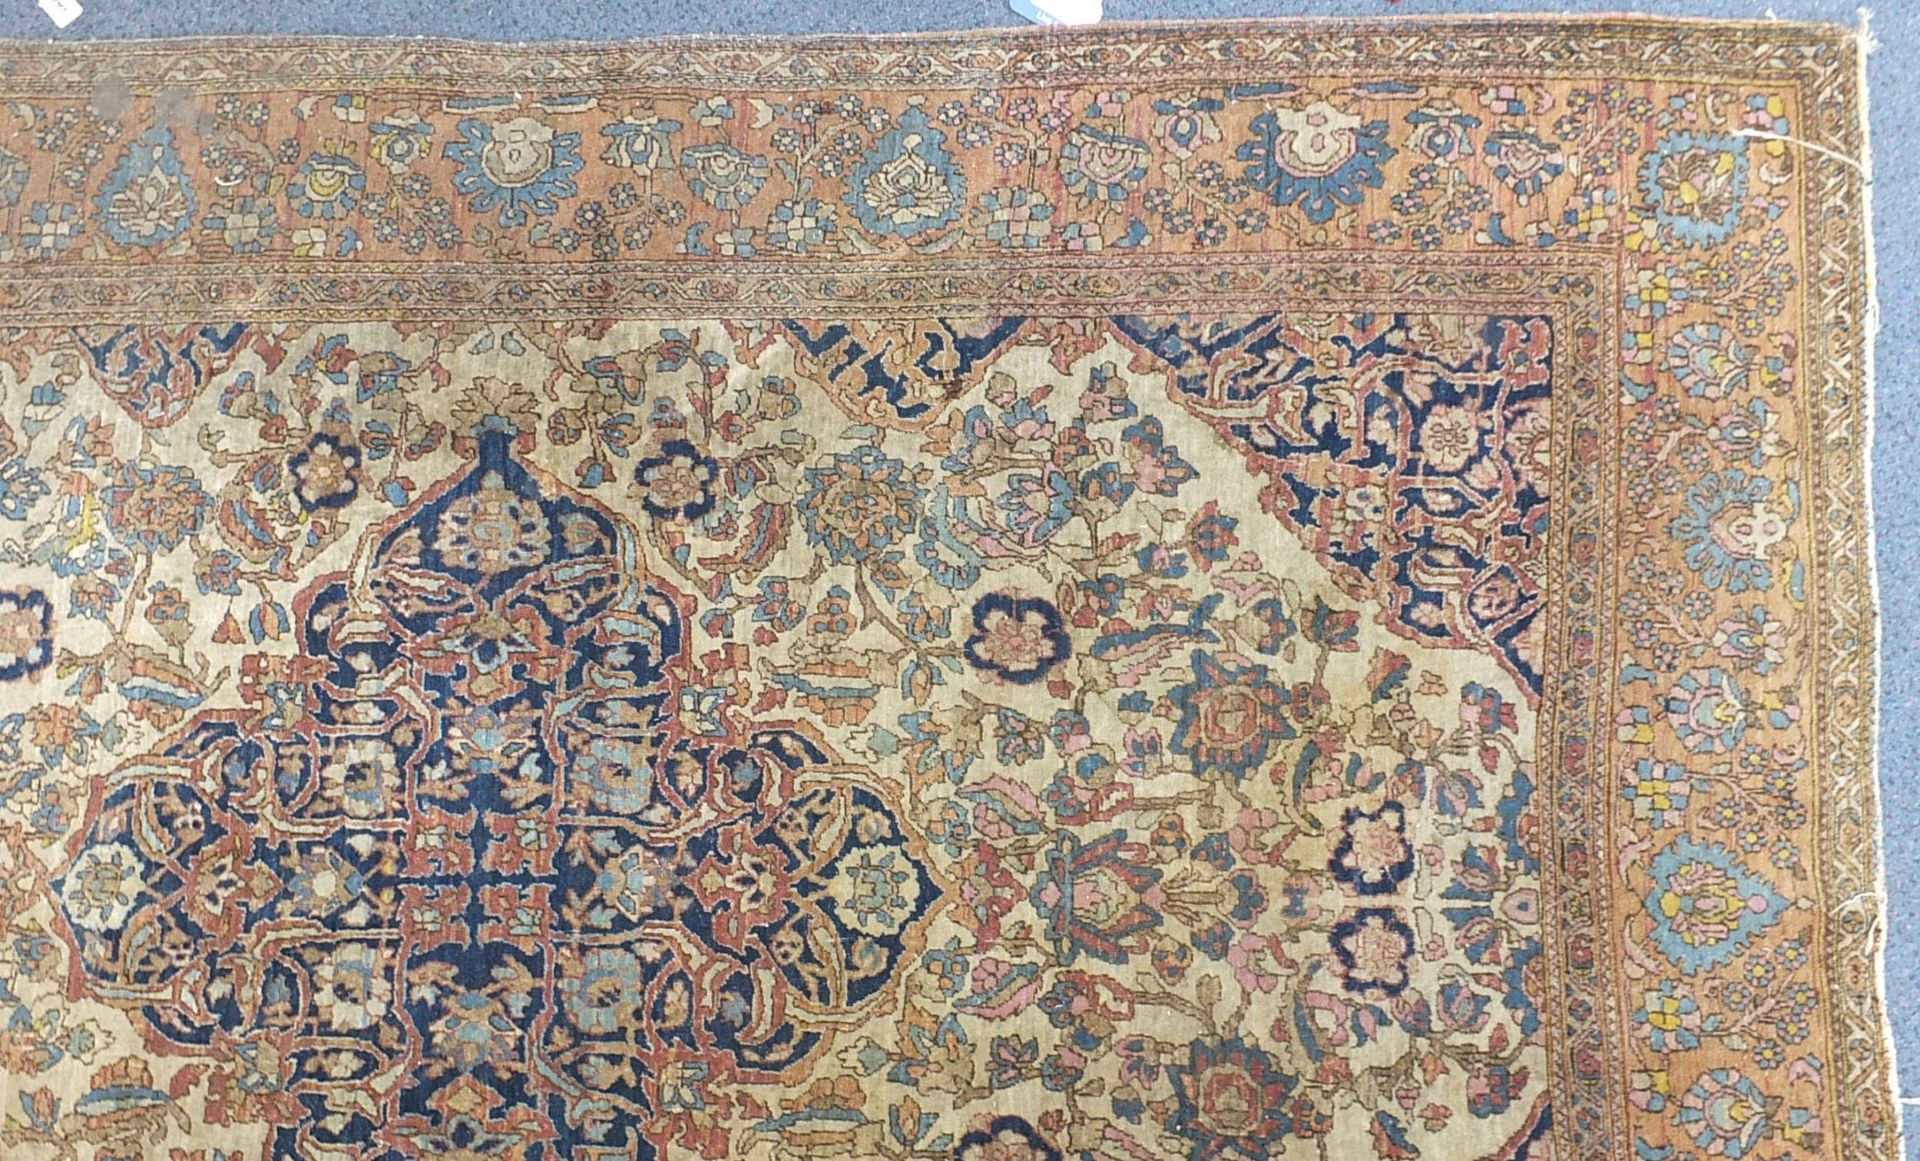 Rectangular beige and blue ground rug having an all over floral design, 205cm x 143cm - Image 3 of 6